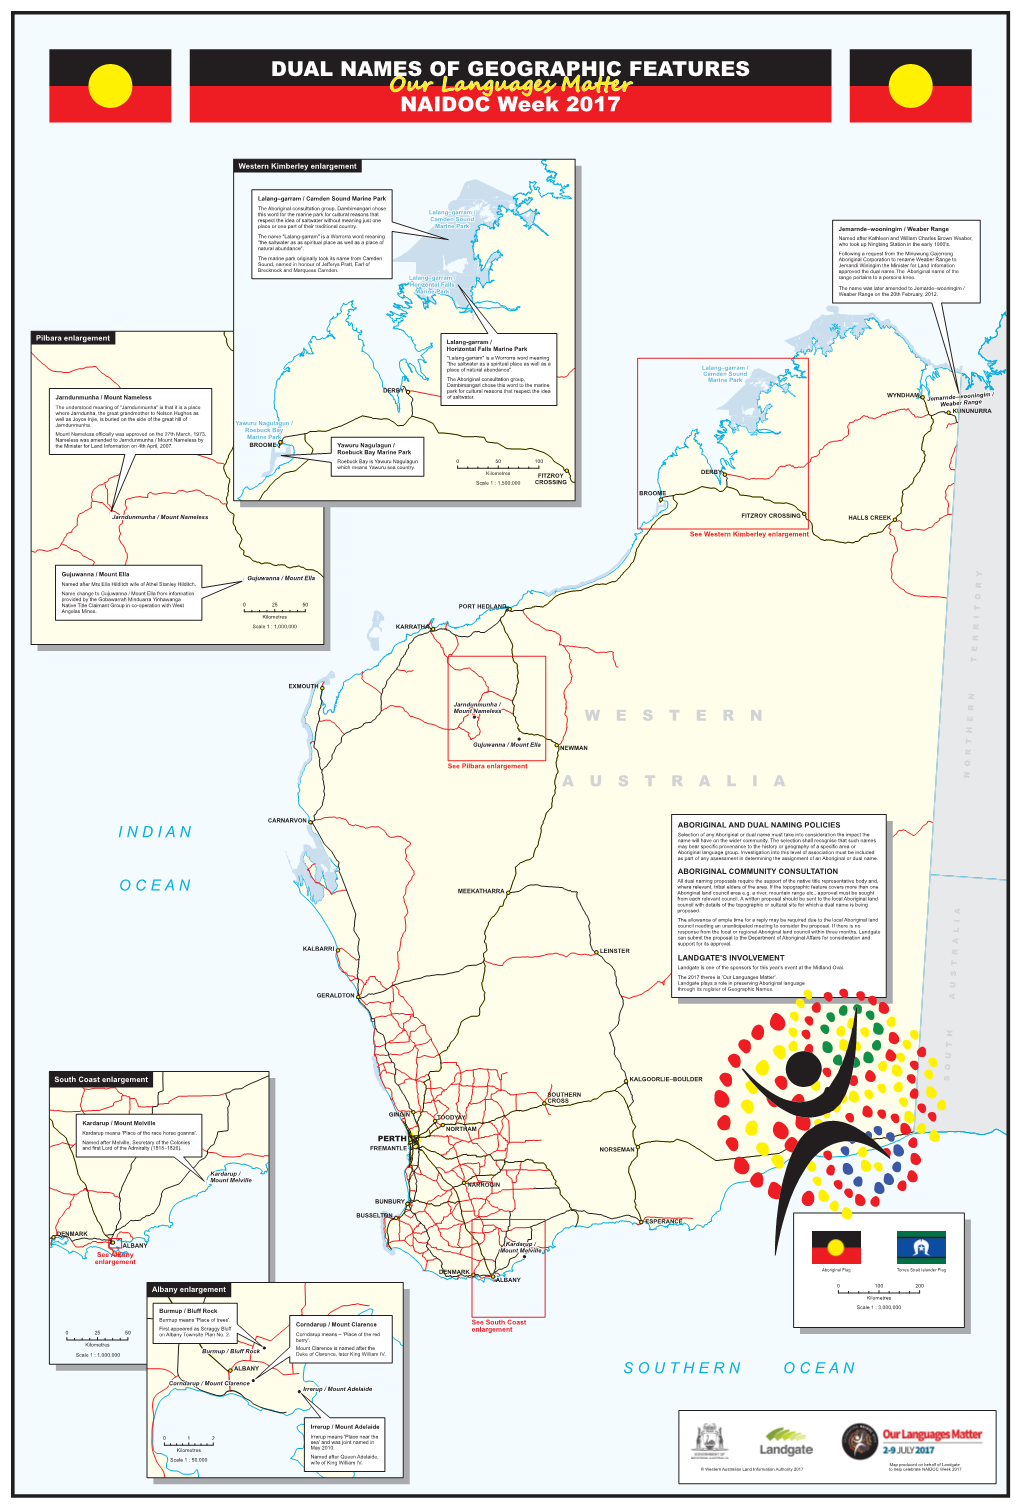 DUAL NAMES of GEOGRAPHIC FEATURES NAIDOC Week 2017